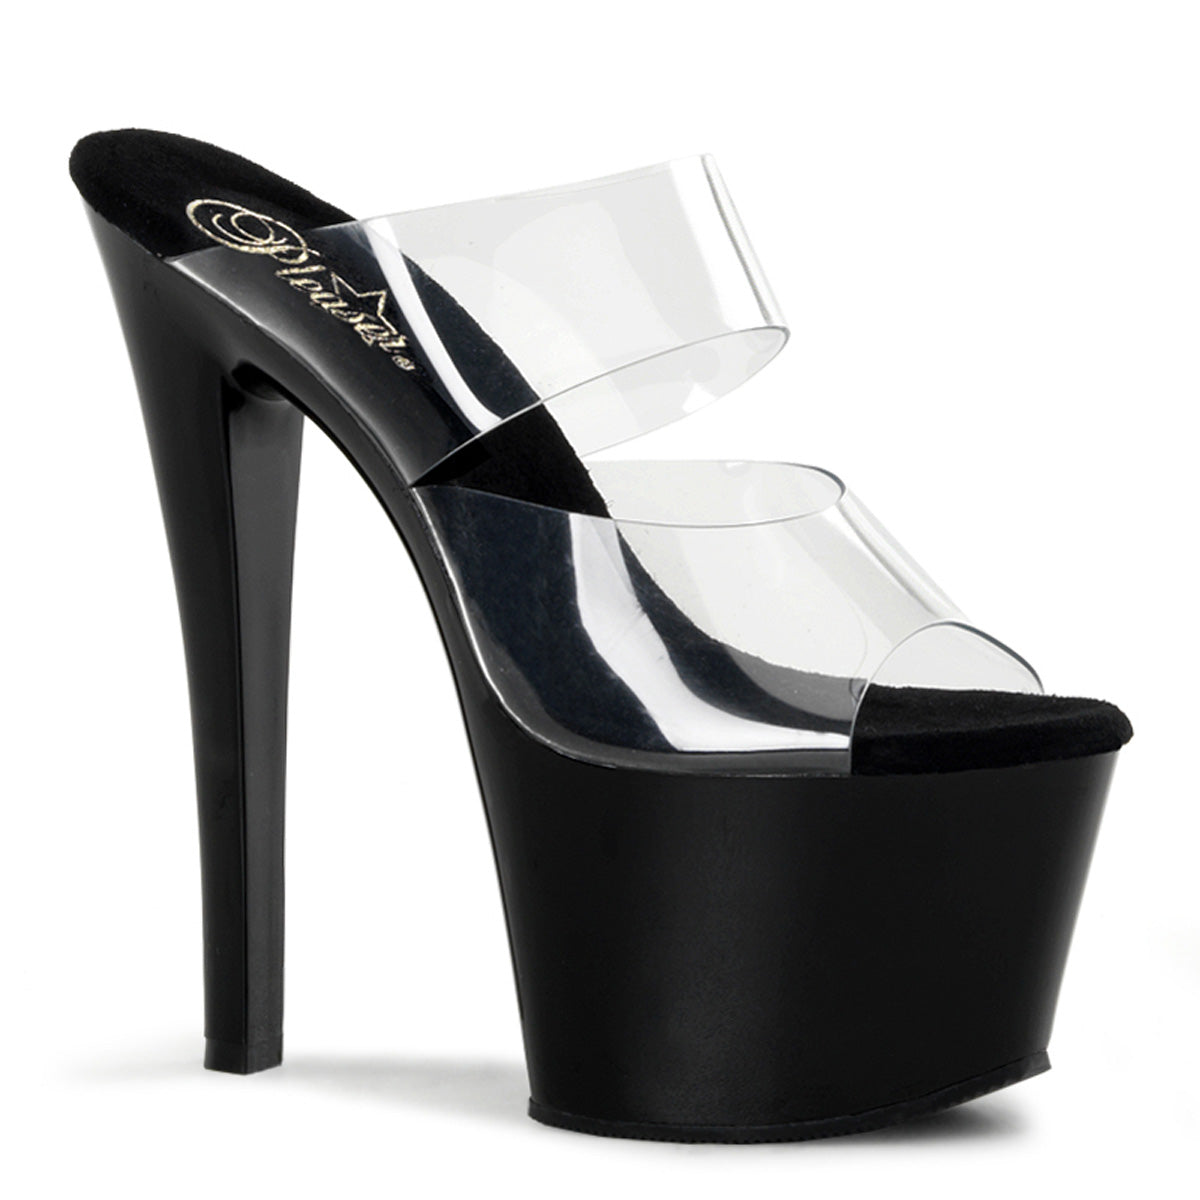 Pleaser Sky 302 Black/Clear - Model Express Vancouver